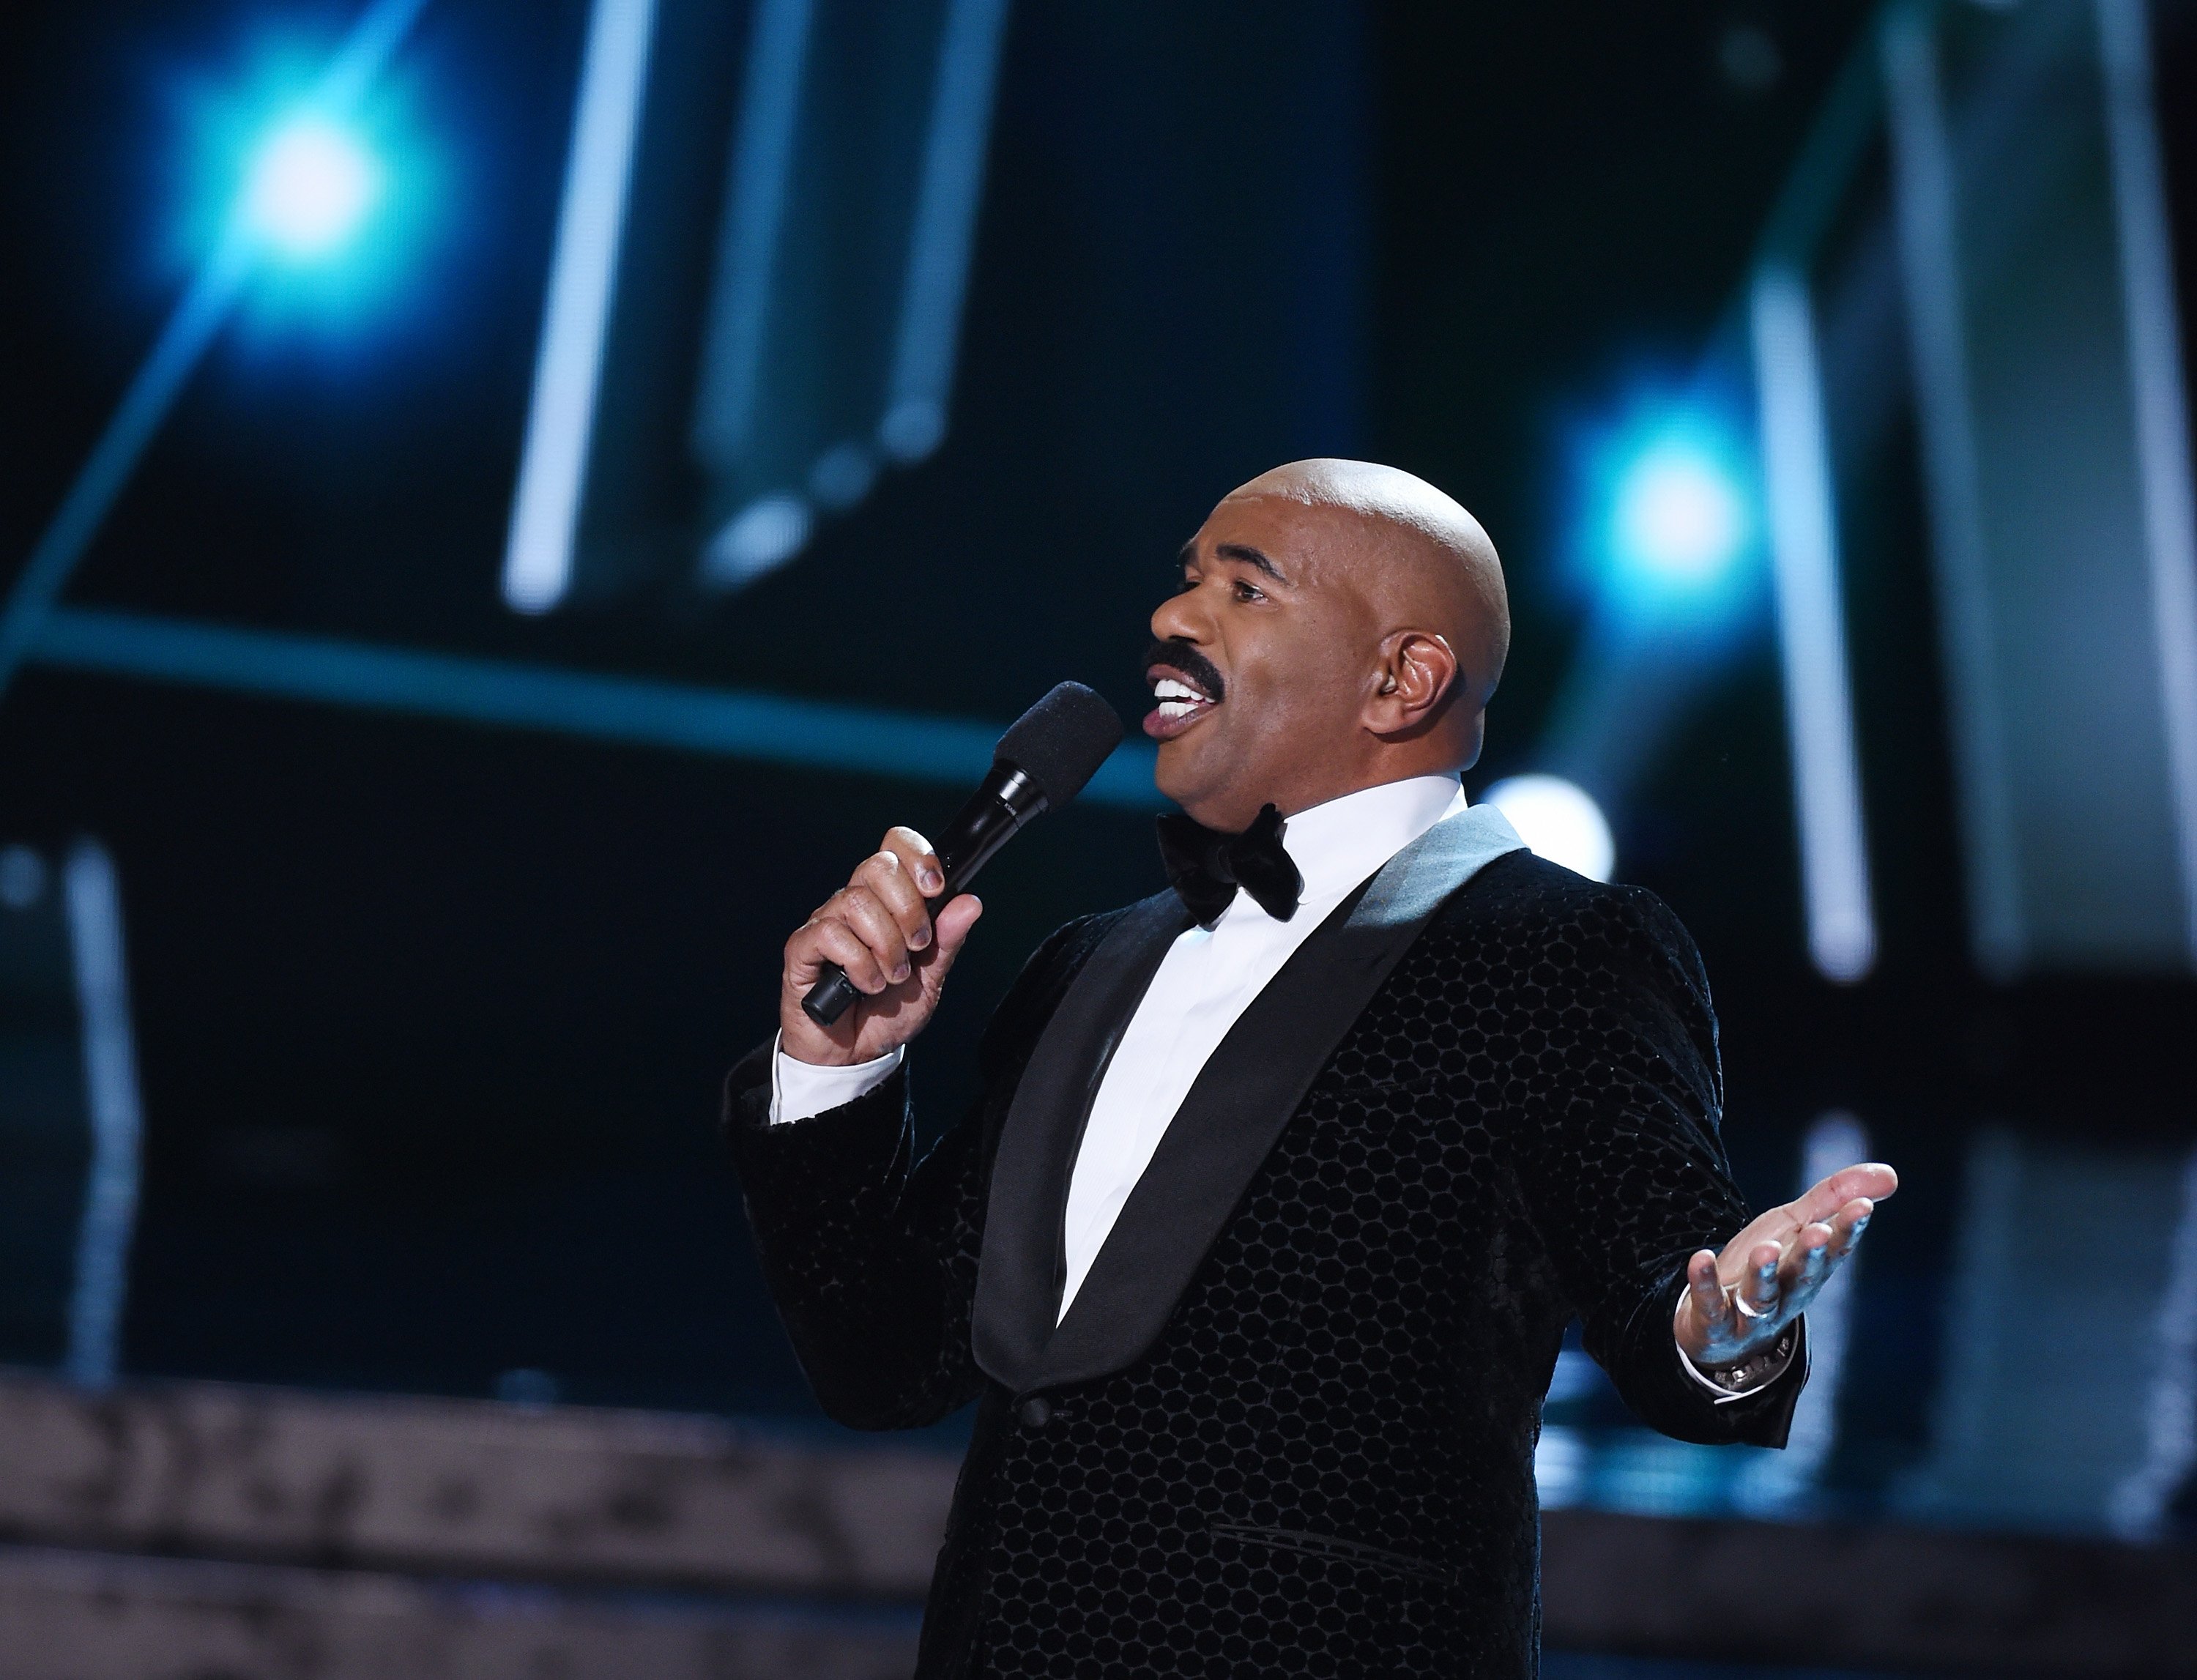 Steve Harvey hosts the 2015 Miss Universe Pageant on December 20, 2015 in Las Vegas, Nevada. | Photo: GettyImages/Global Images of Ukraine